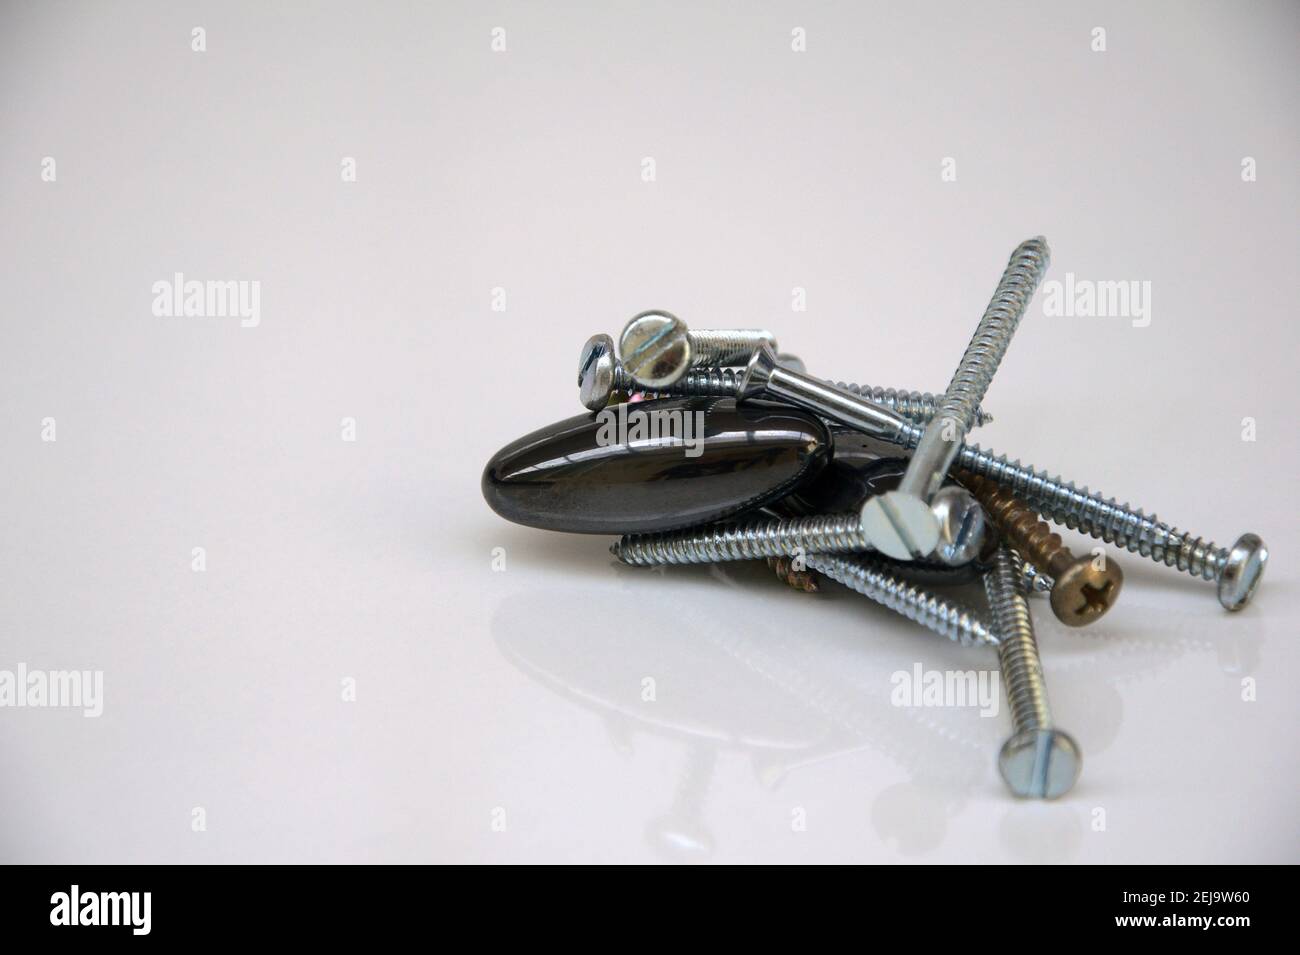 Magnet, with several screws in white steel, attracted by the magnetism of the magnet, white background, copy space, Brazil, South America Stock Photo